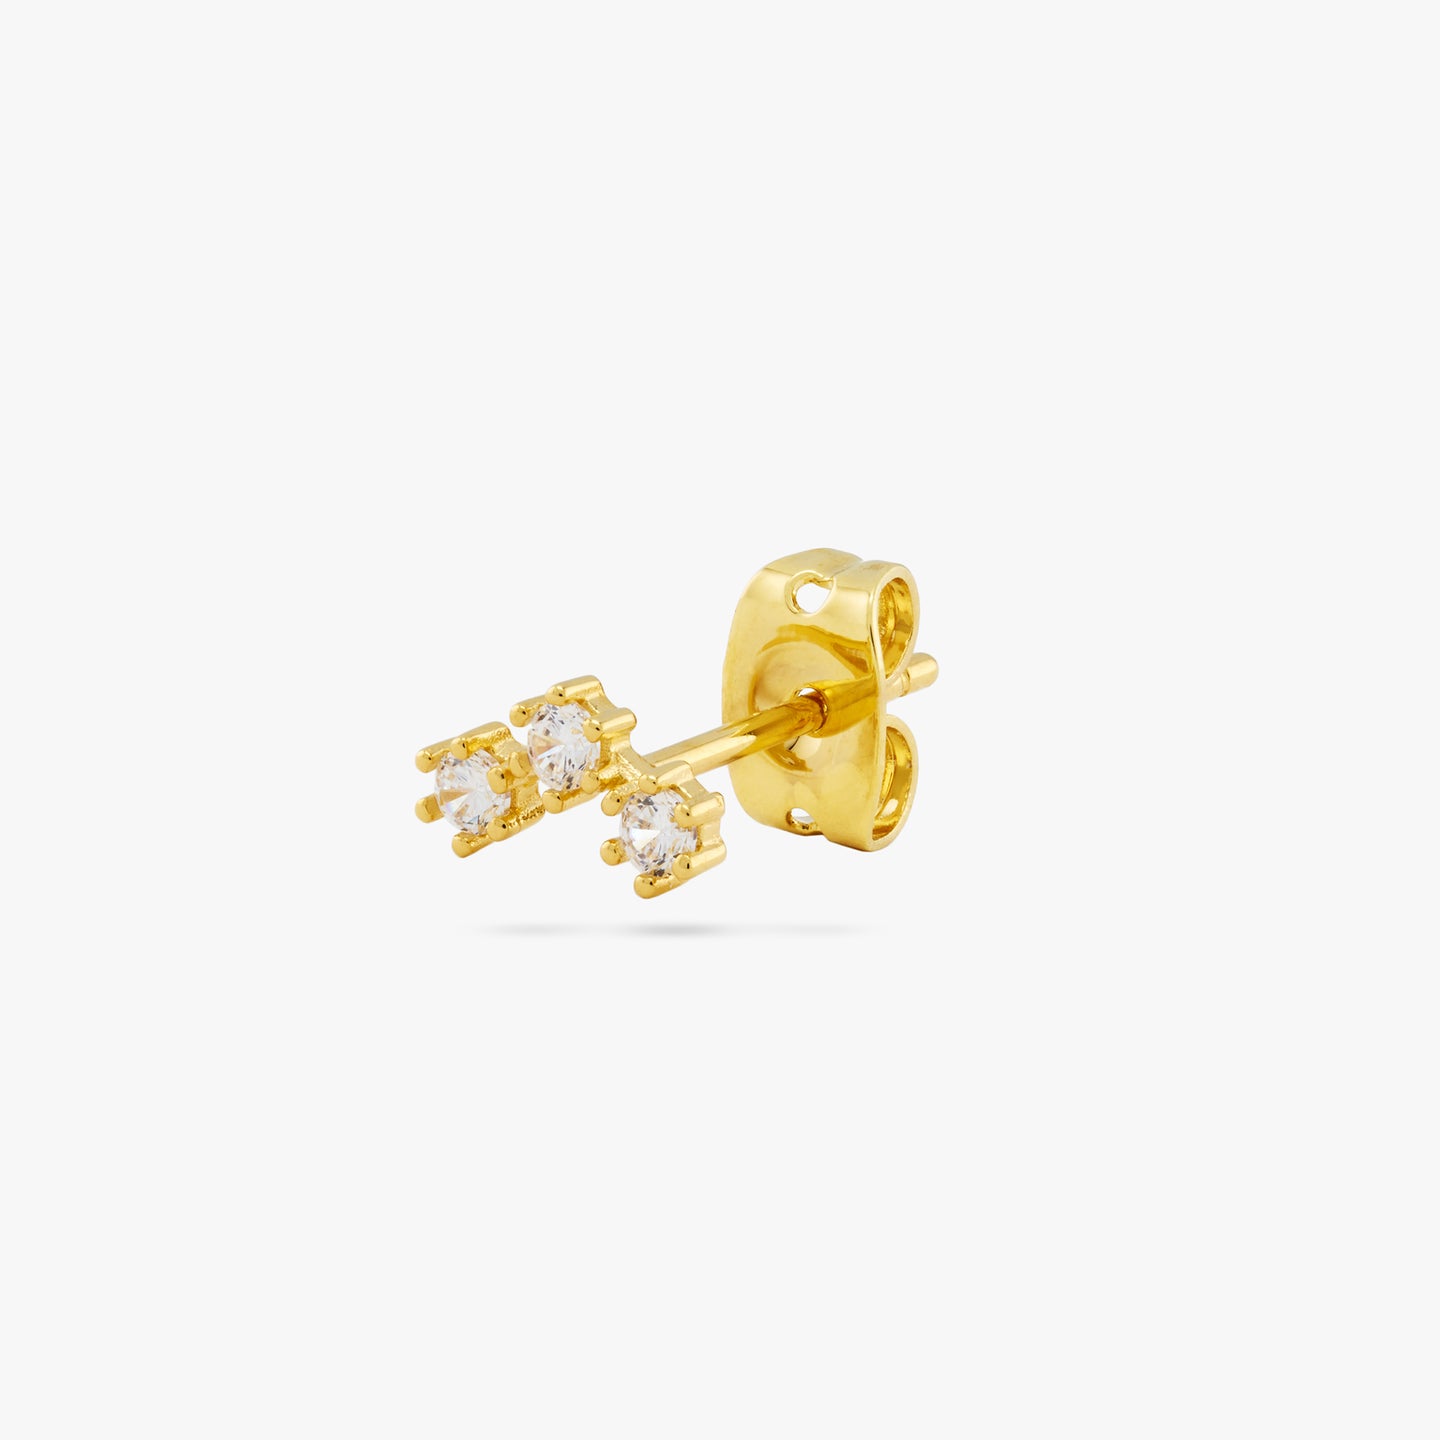 Three cubic zirconia in an arch shaped gold cluster stud color:null|gold/clear